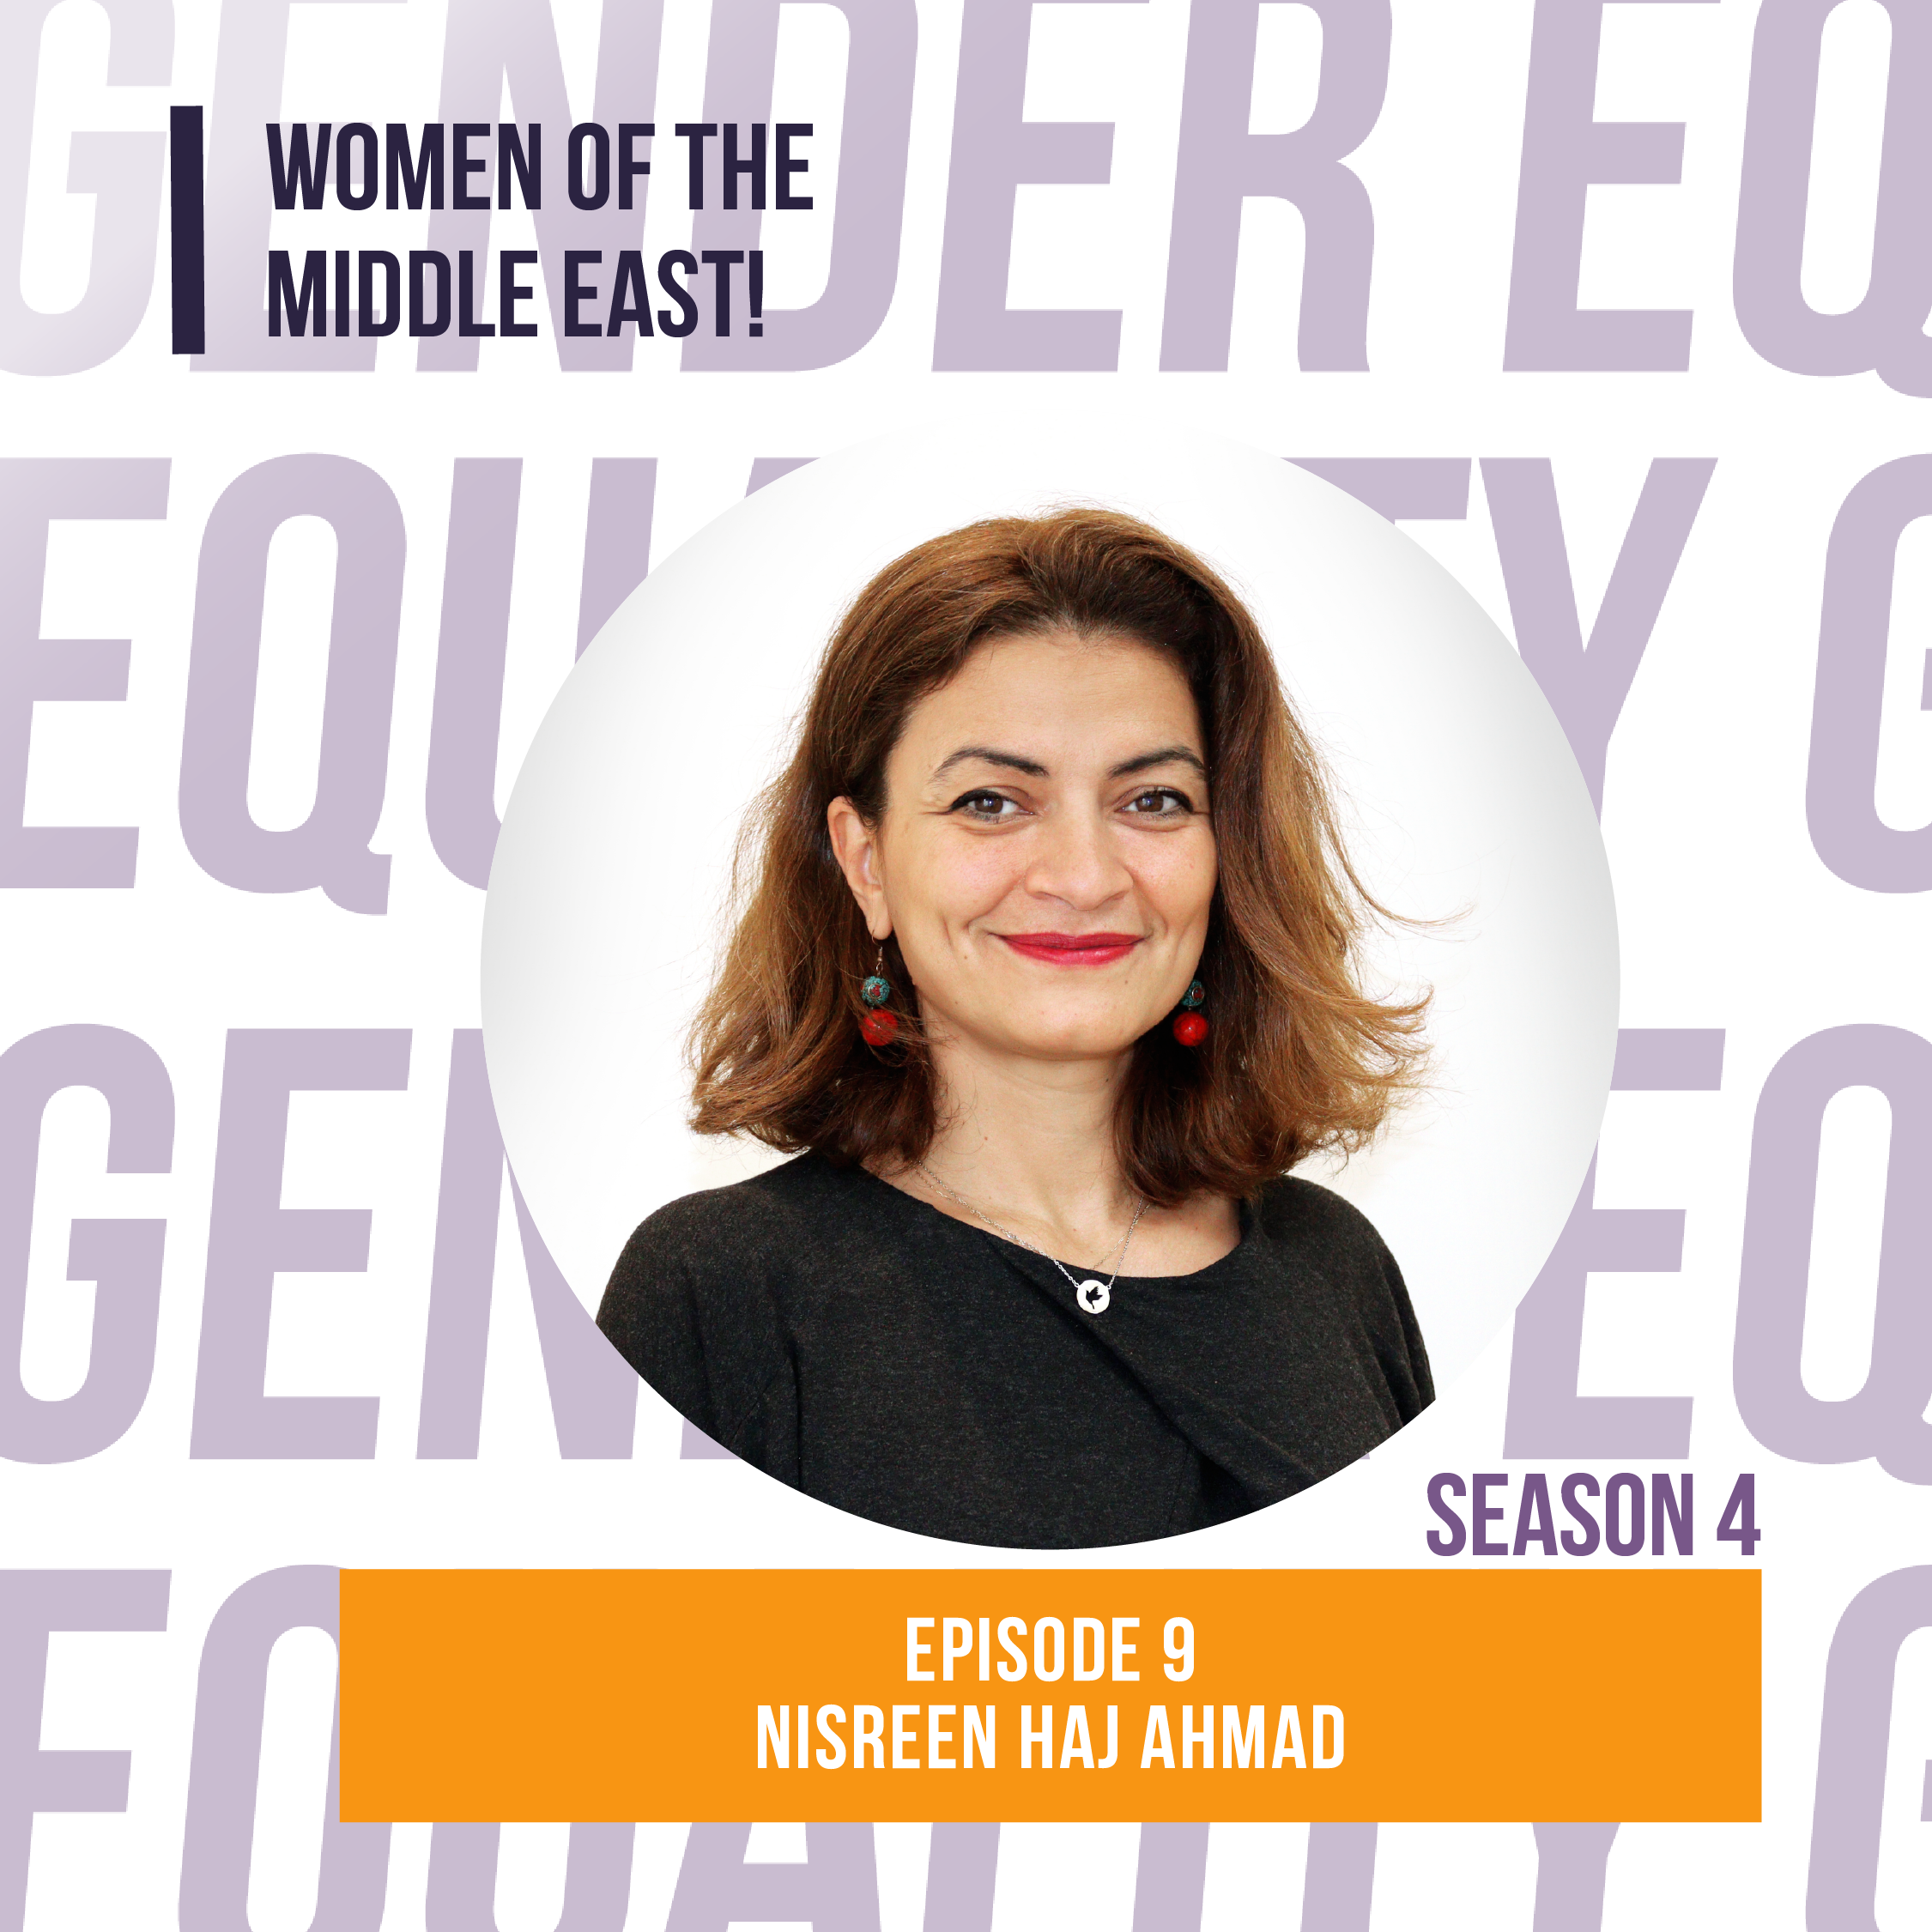 S4 Voices Across Genres Ep 9: Unleashing the Power of Groups, Grassroots Movements and Communities with Nisreen Haj Ahmad